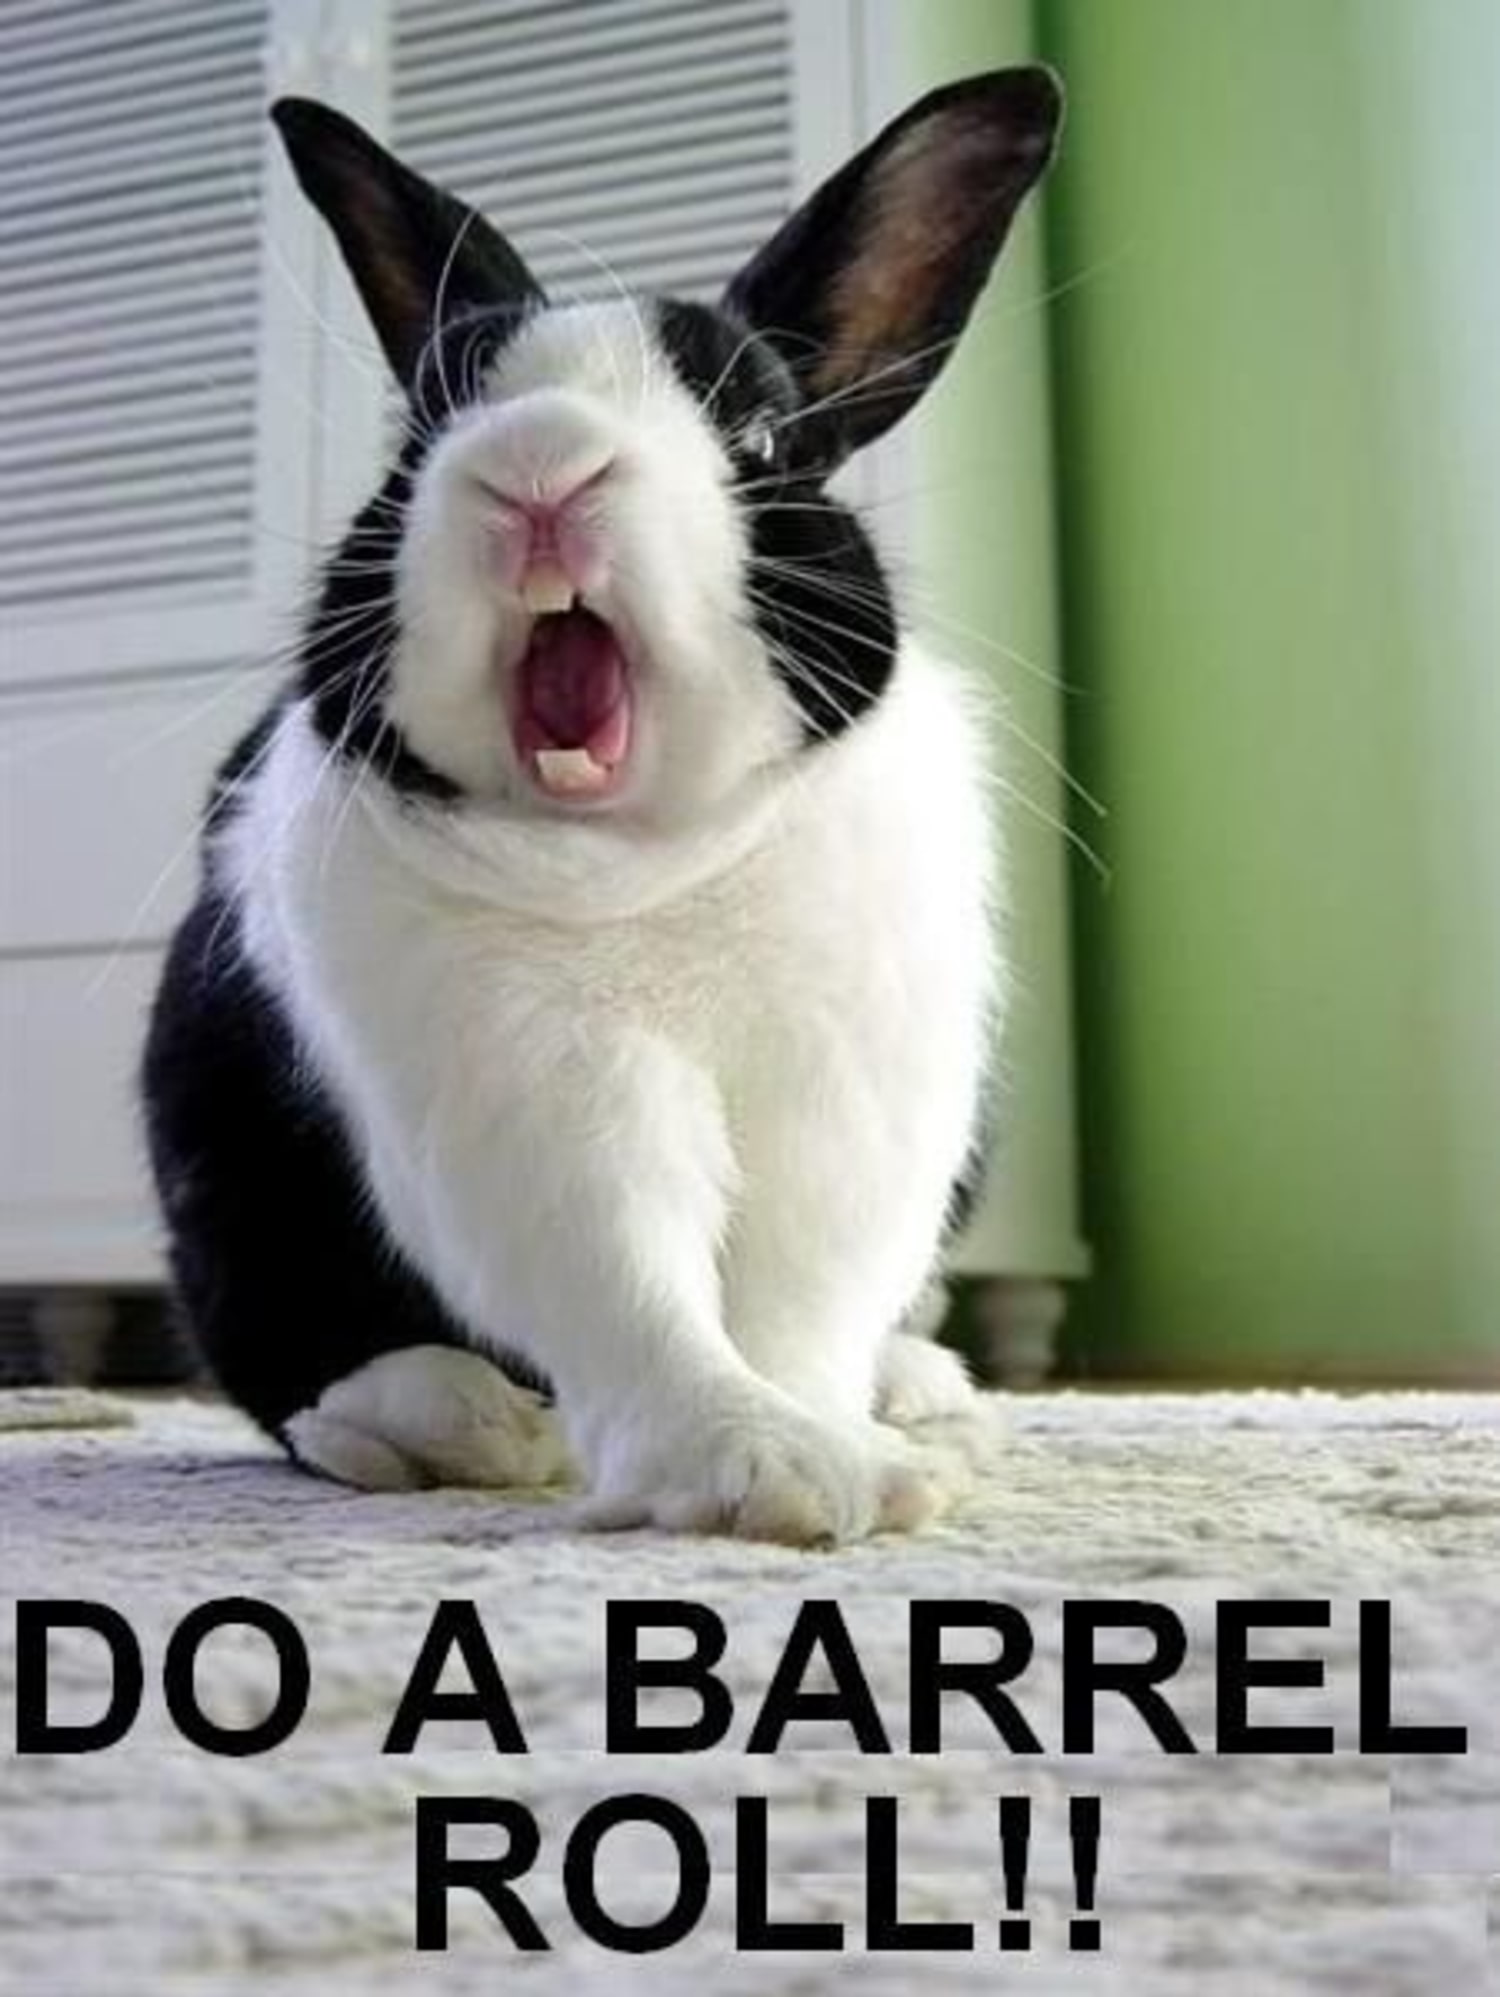 Comment Section for do a barrel roll - Google Search